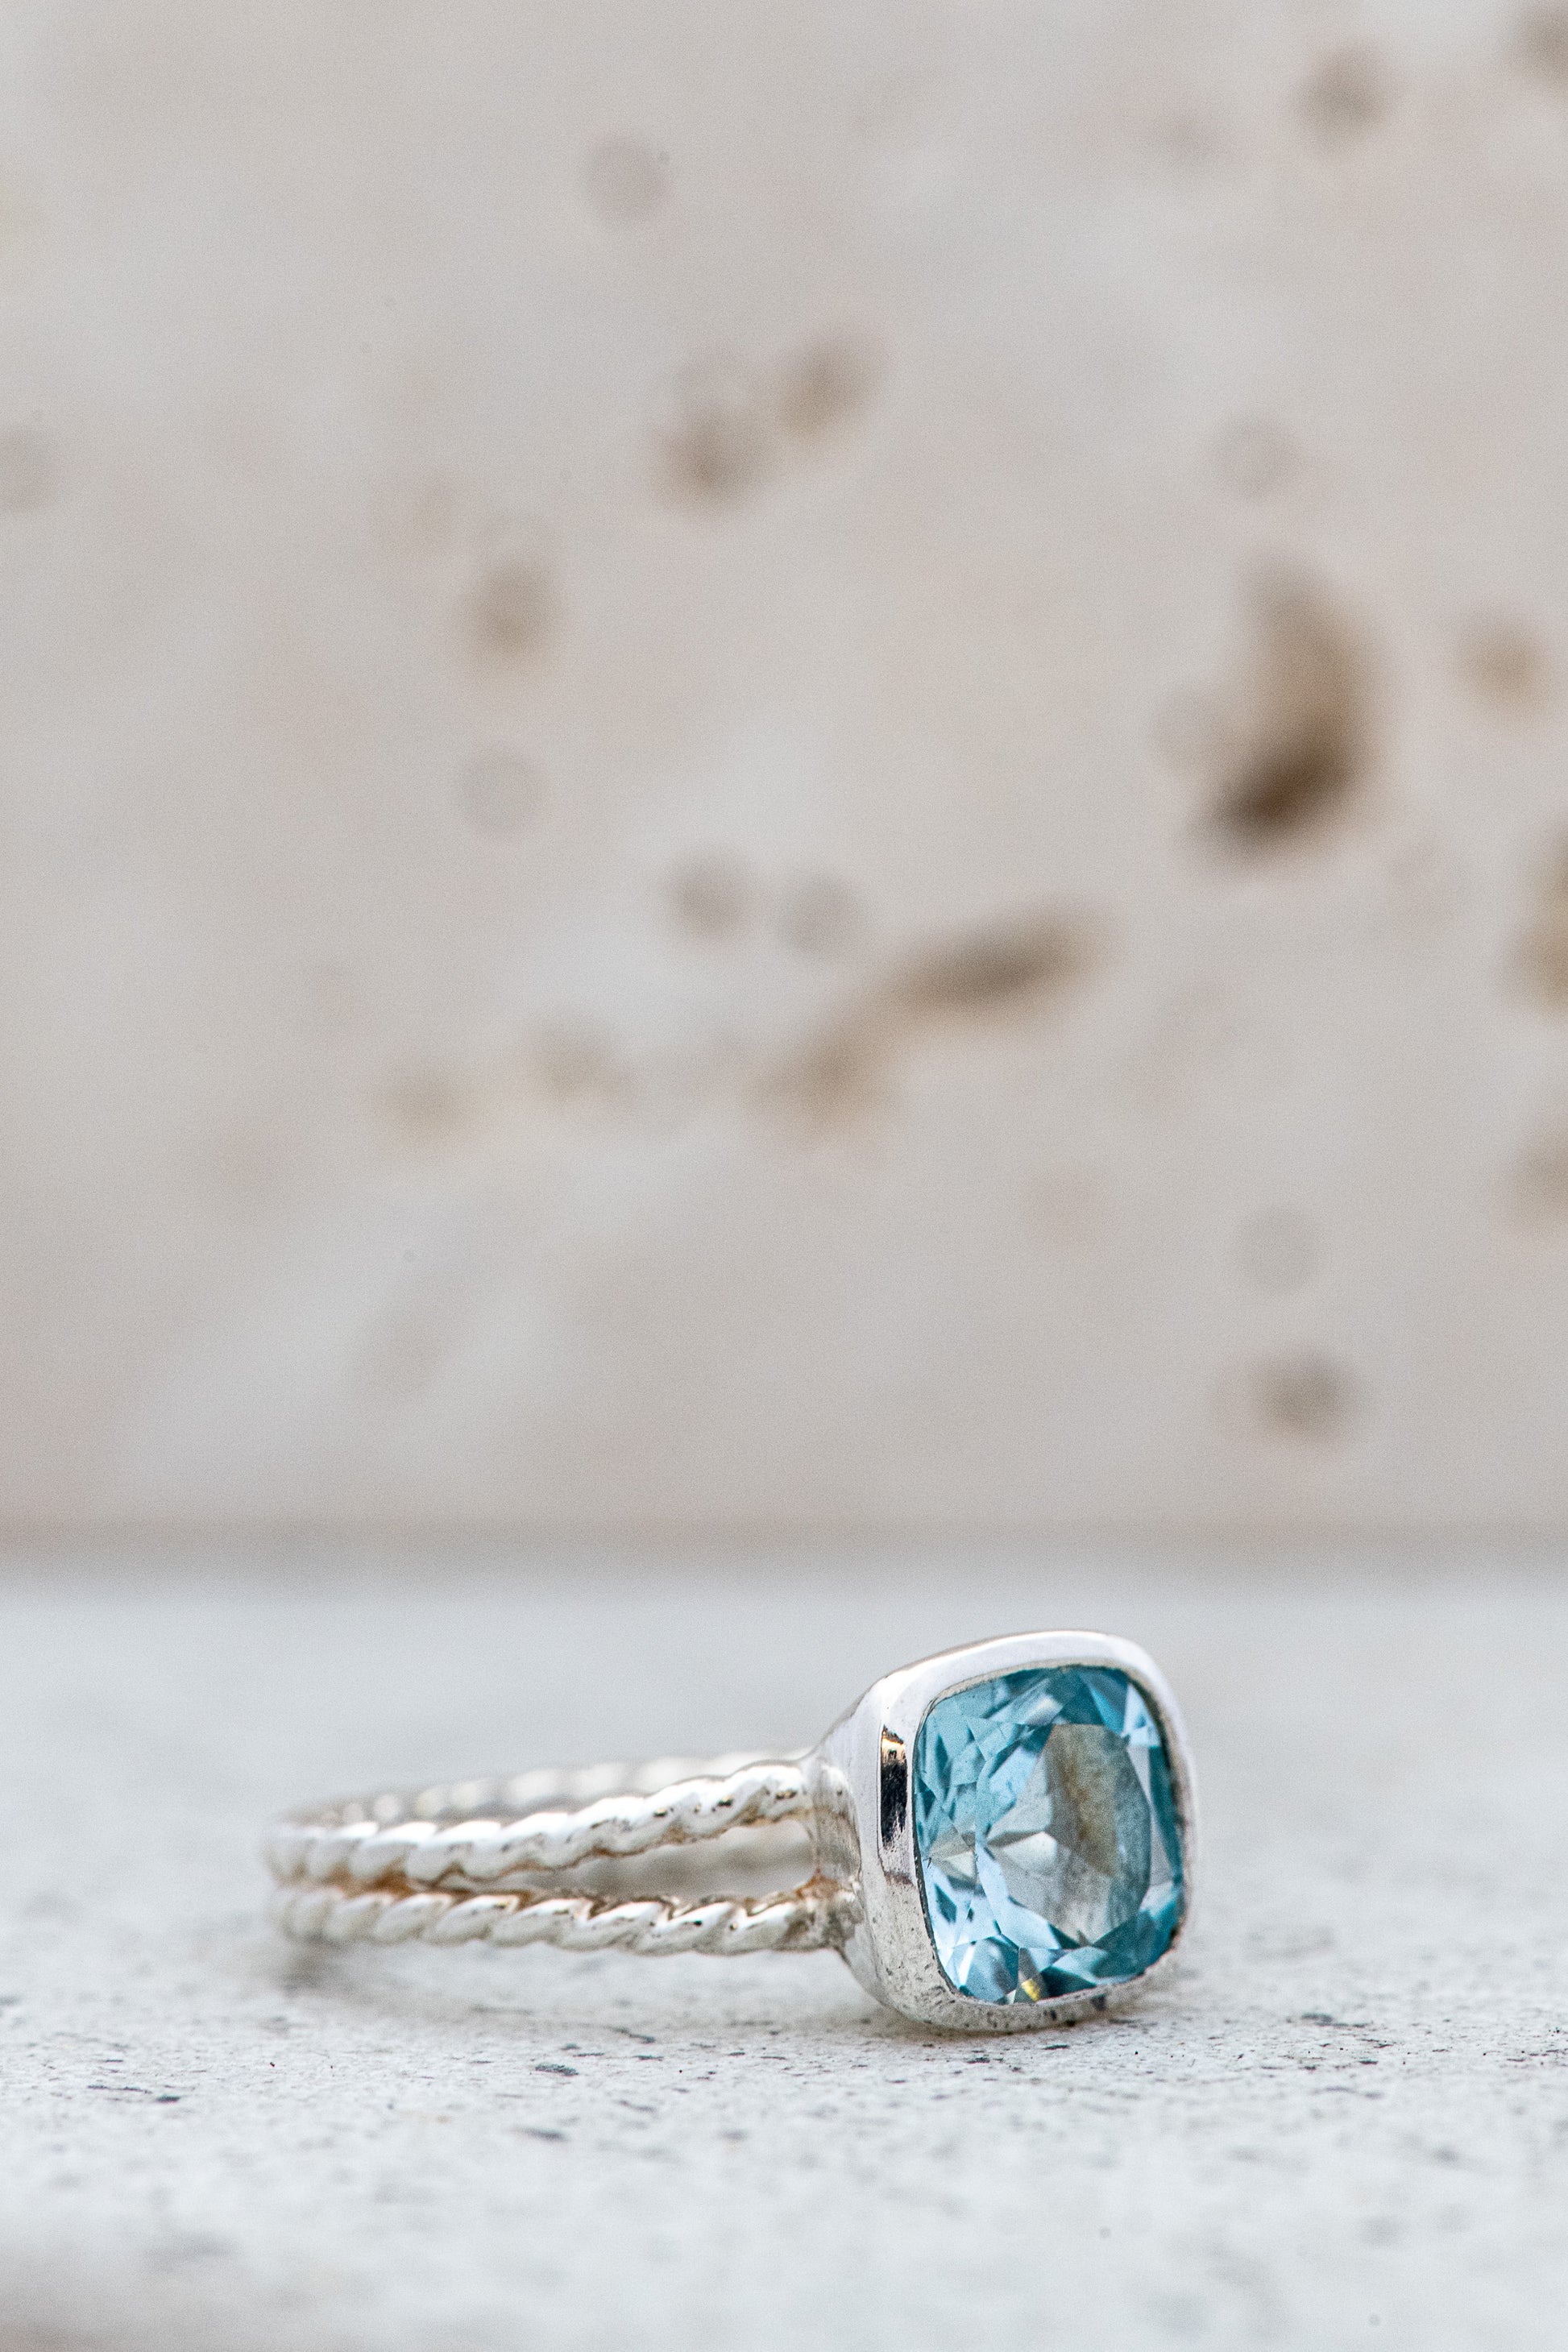 Handmade Sky Blue Topaz Rope Band Ring in Size 6 in sterling silver by Cassin Jewelry.